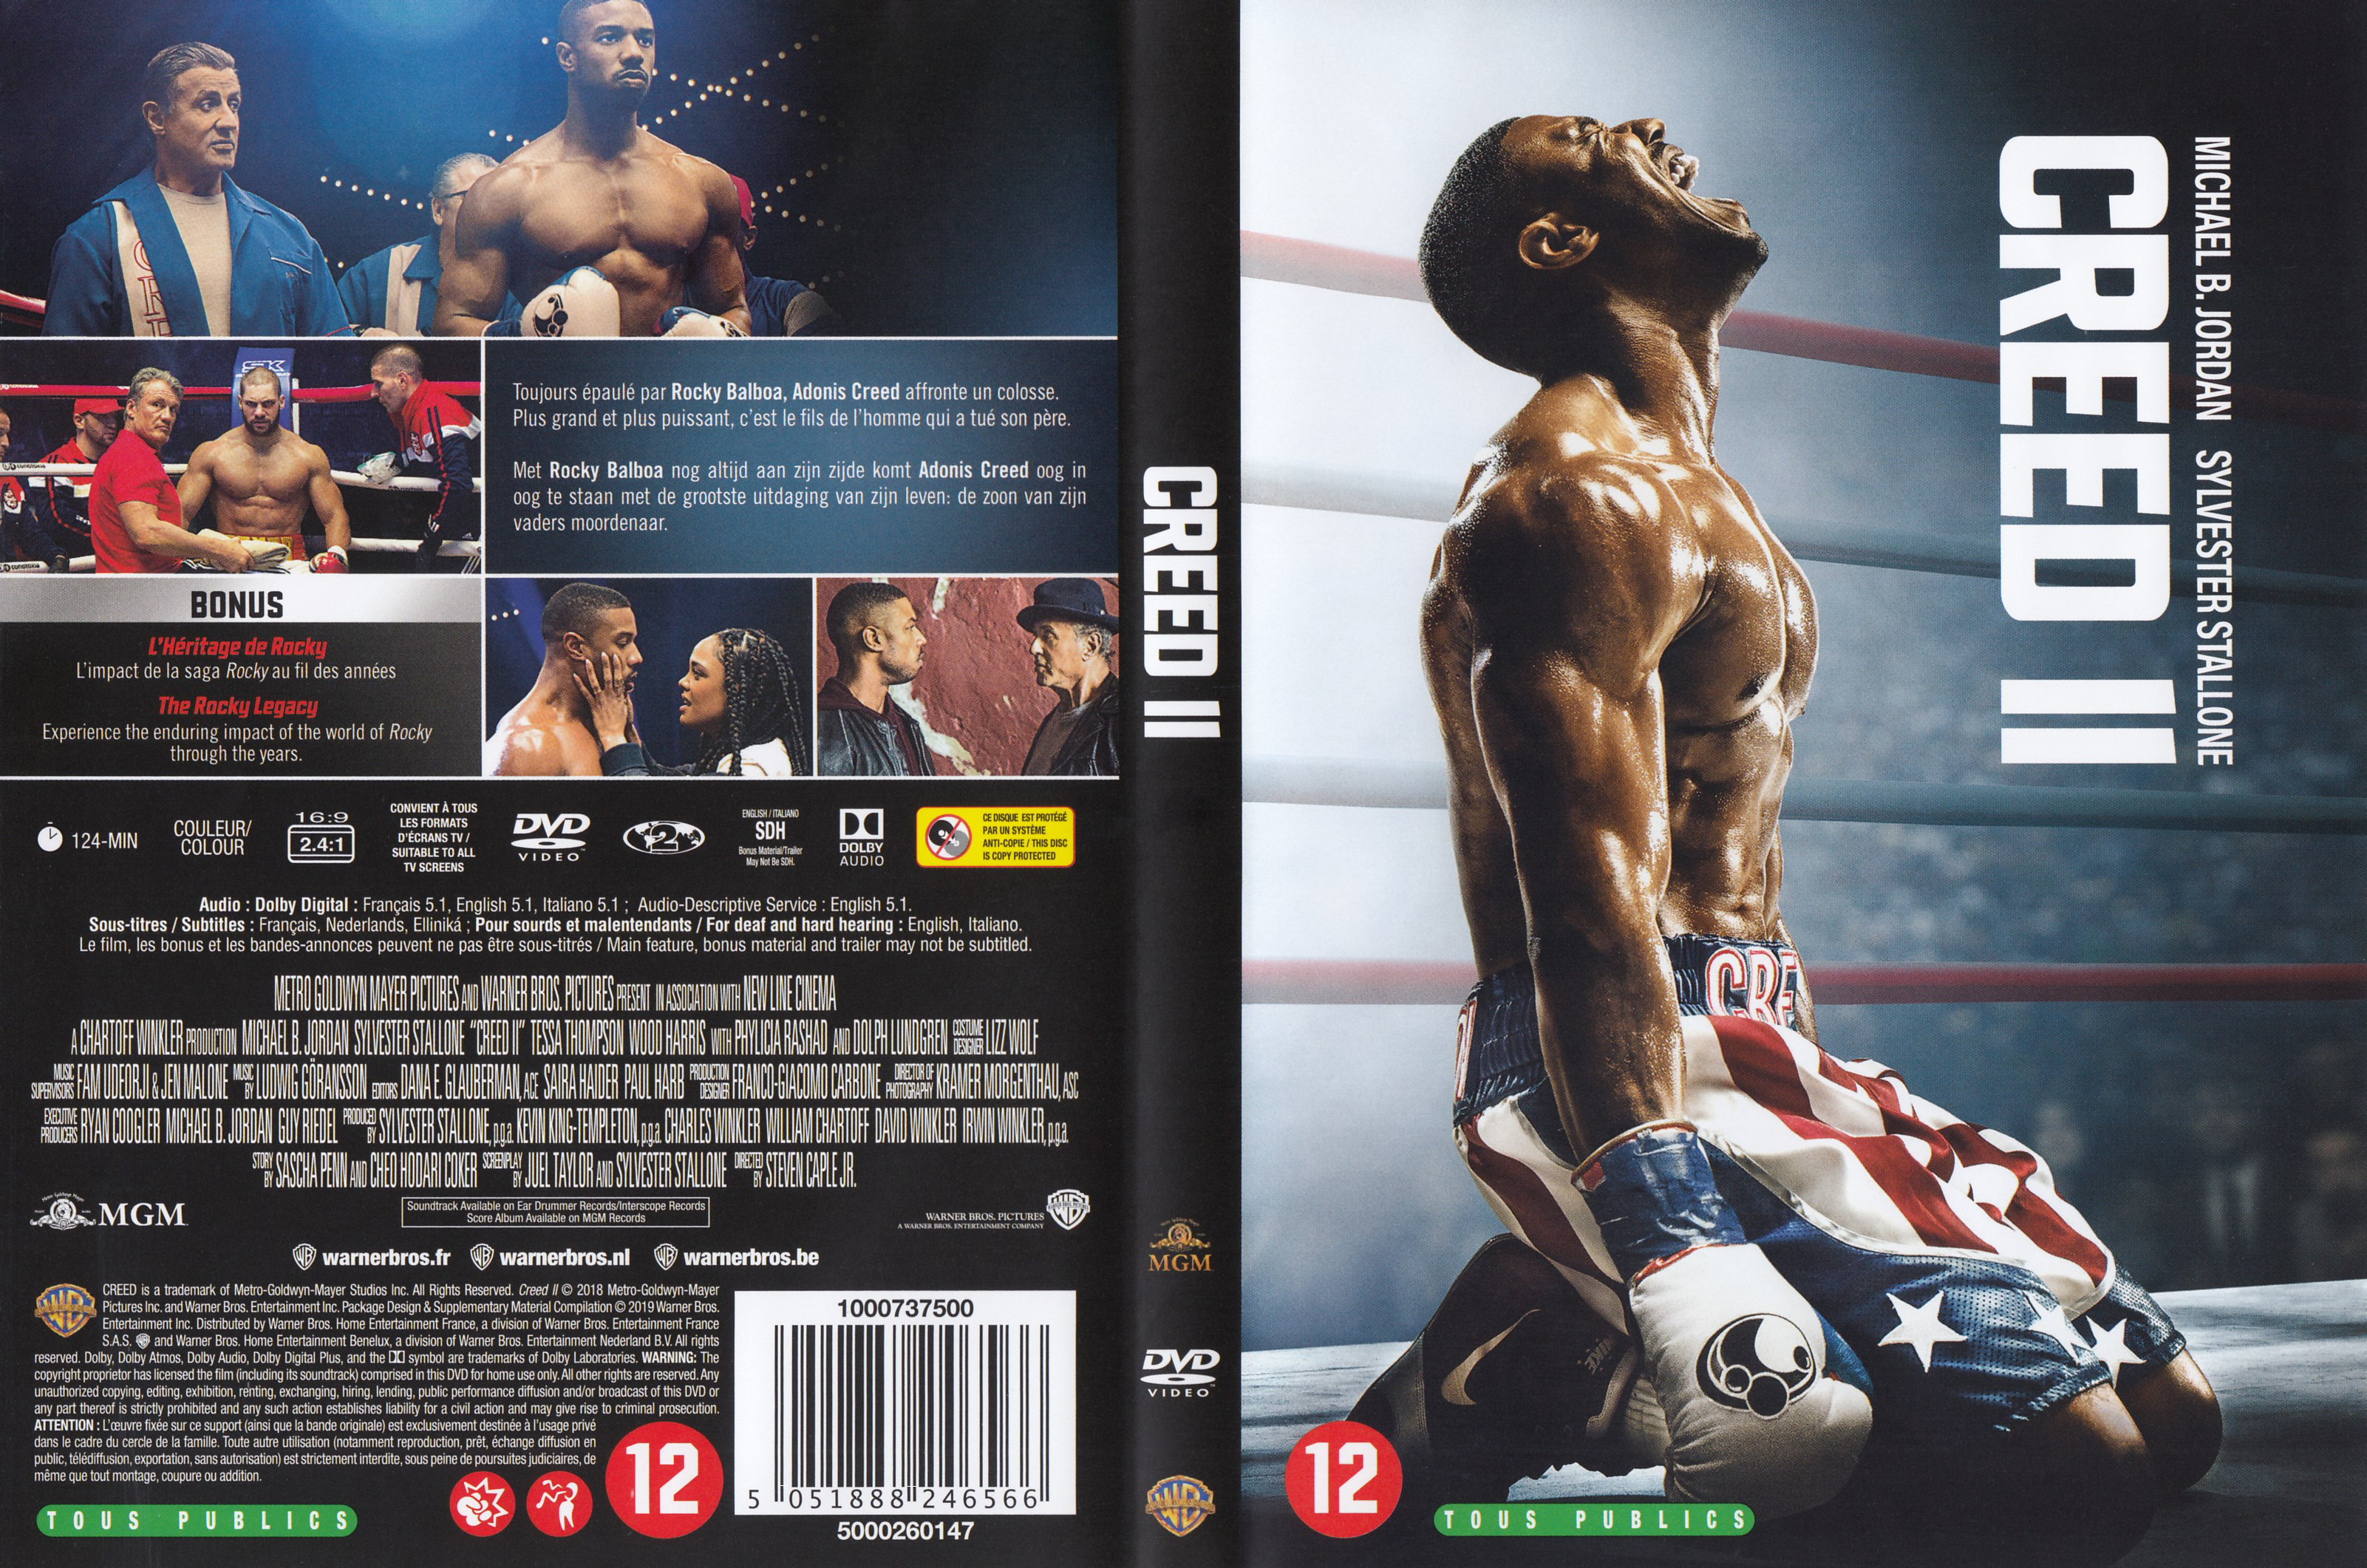 Jaquette DVD Creed 2